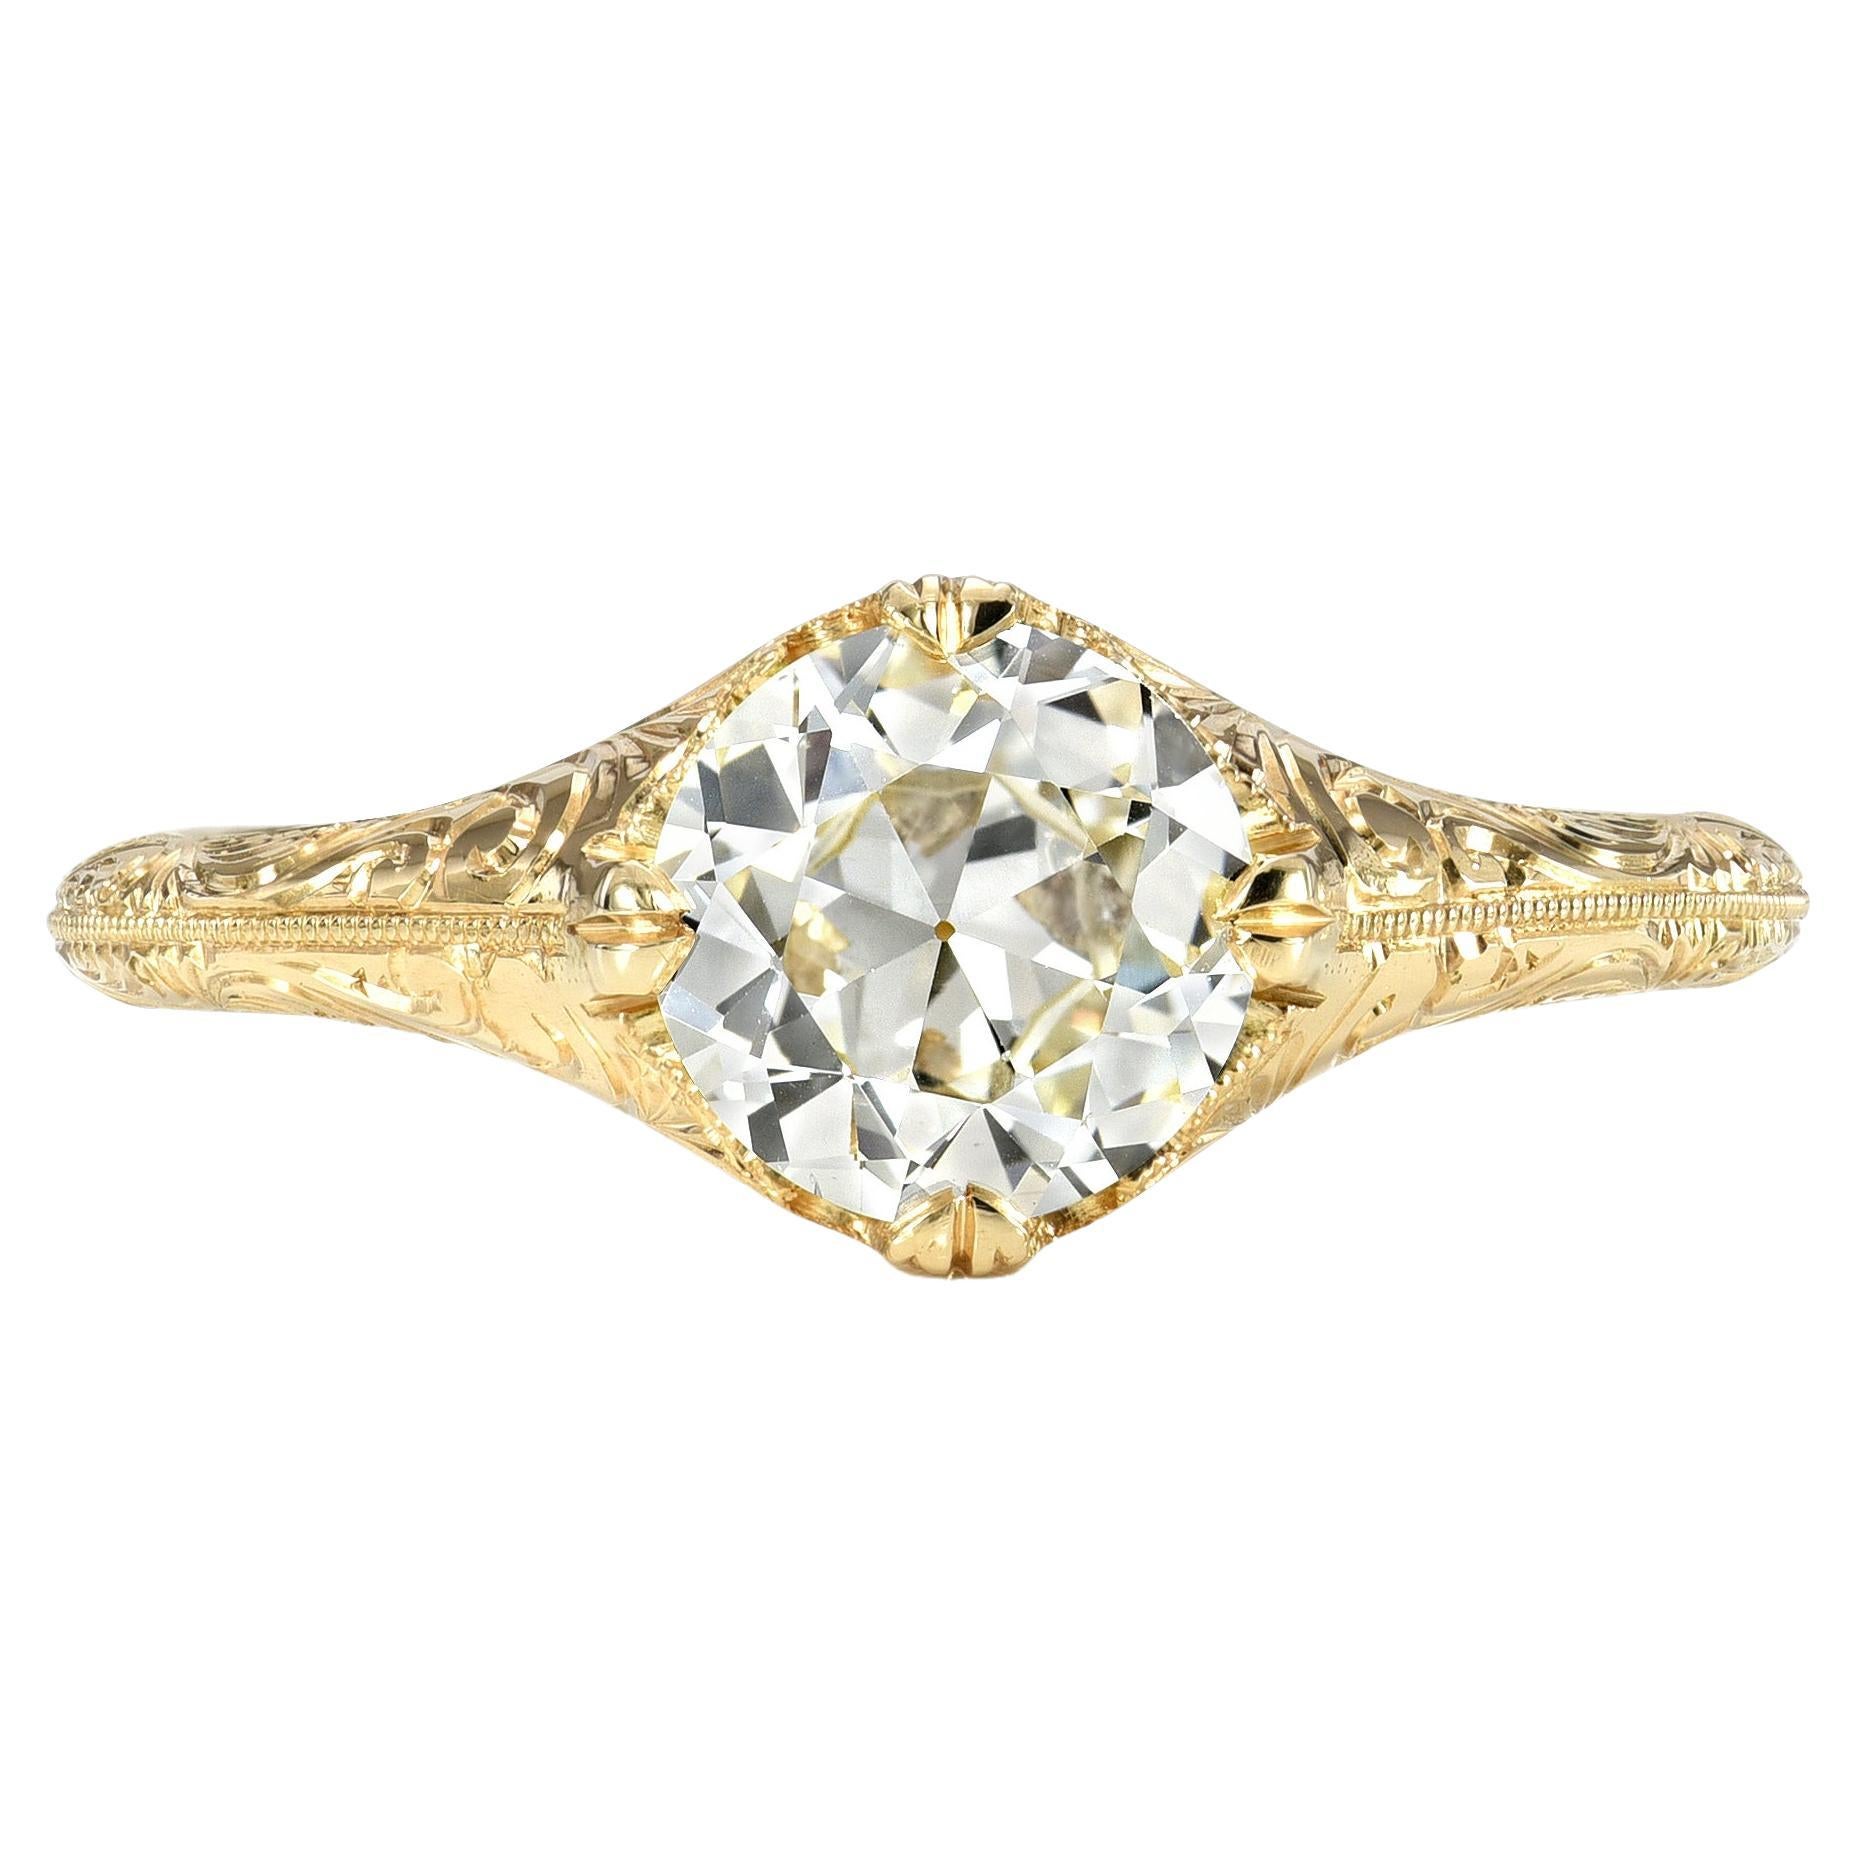 Handcrafted Sara Old European Cut Diamond Ring by Single Stone For Sale